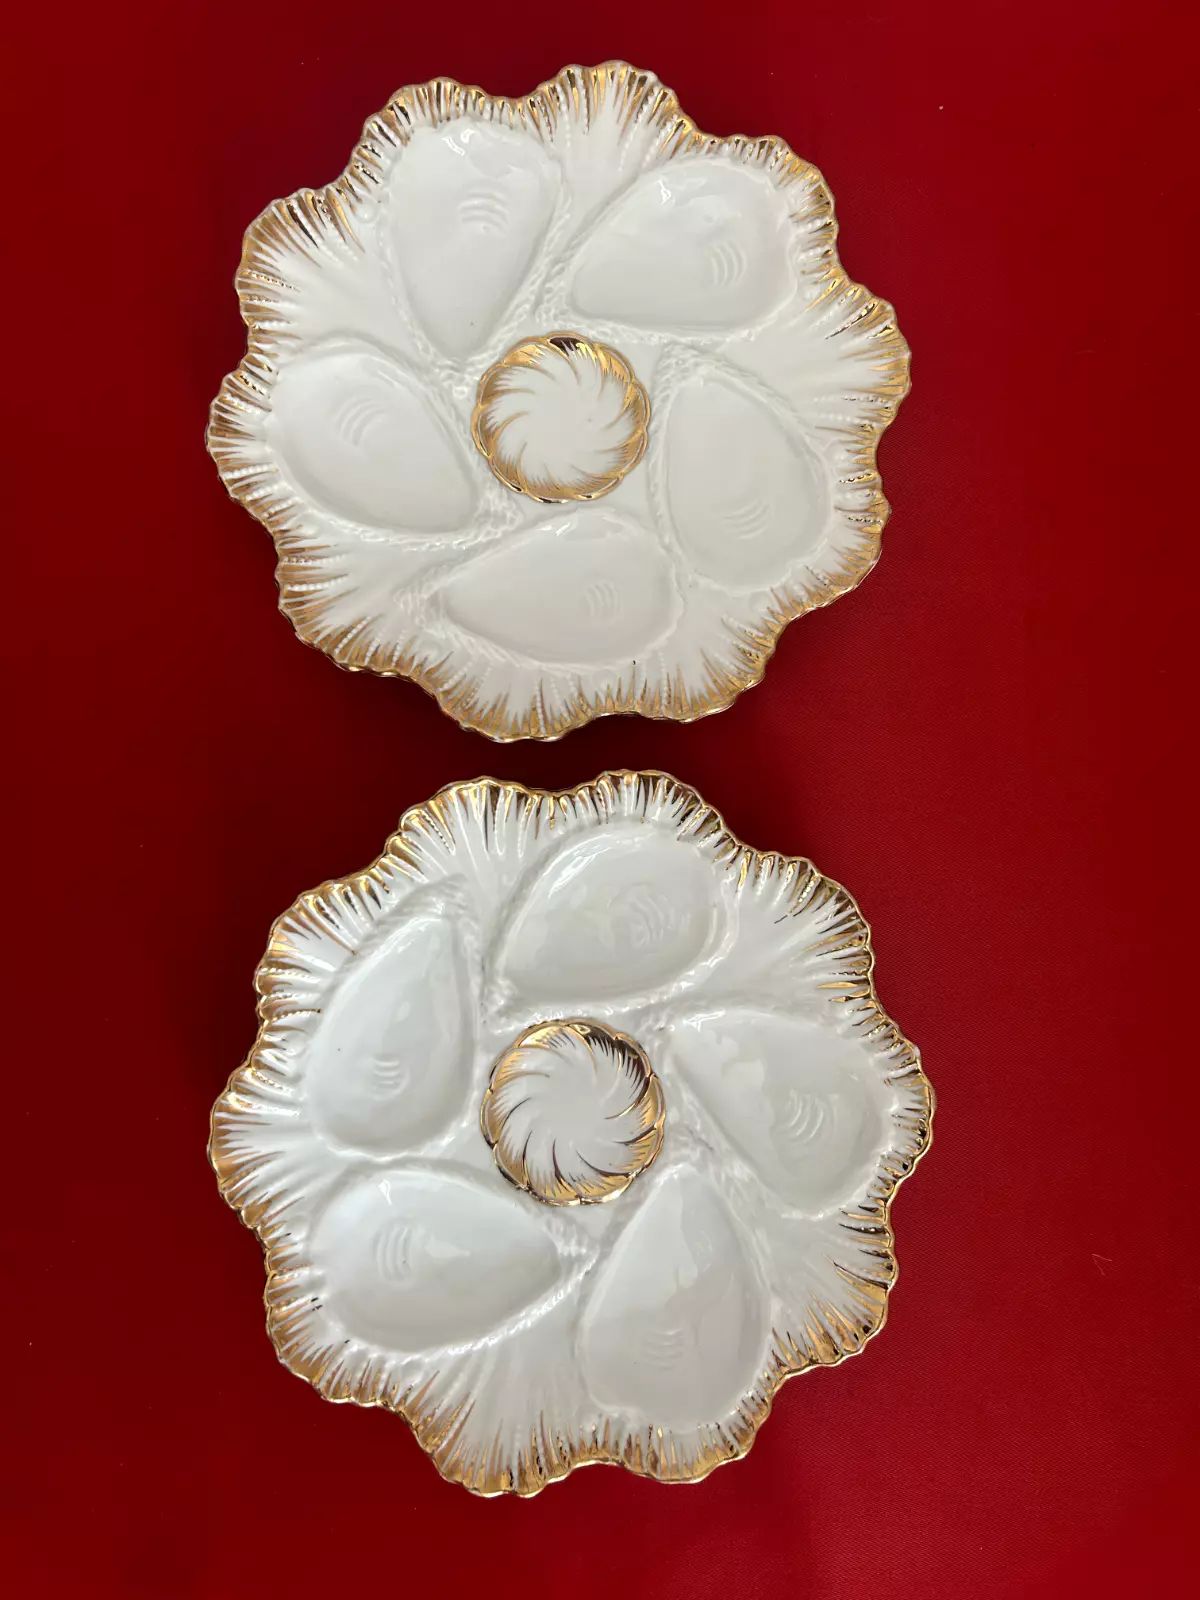 Pair of German Oyster Plate 5 Well Scalloped Edge Gold Gilt 1880s 8 Inch Antique | eBay US